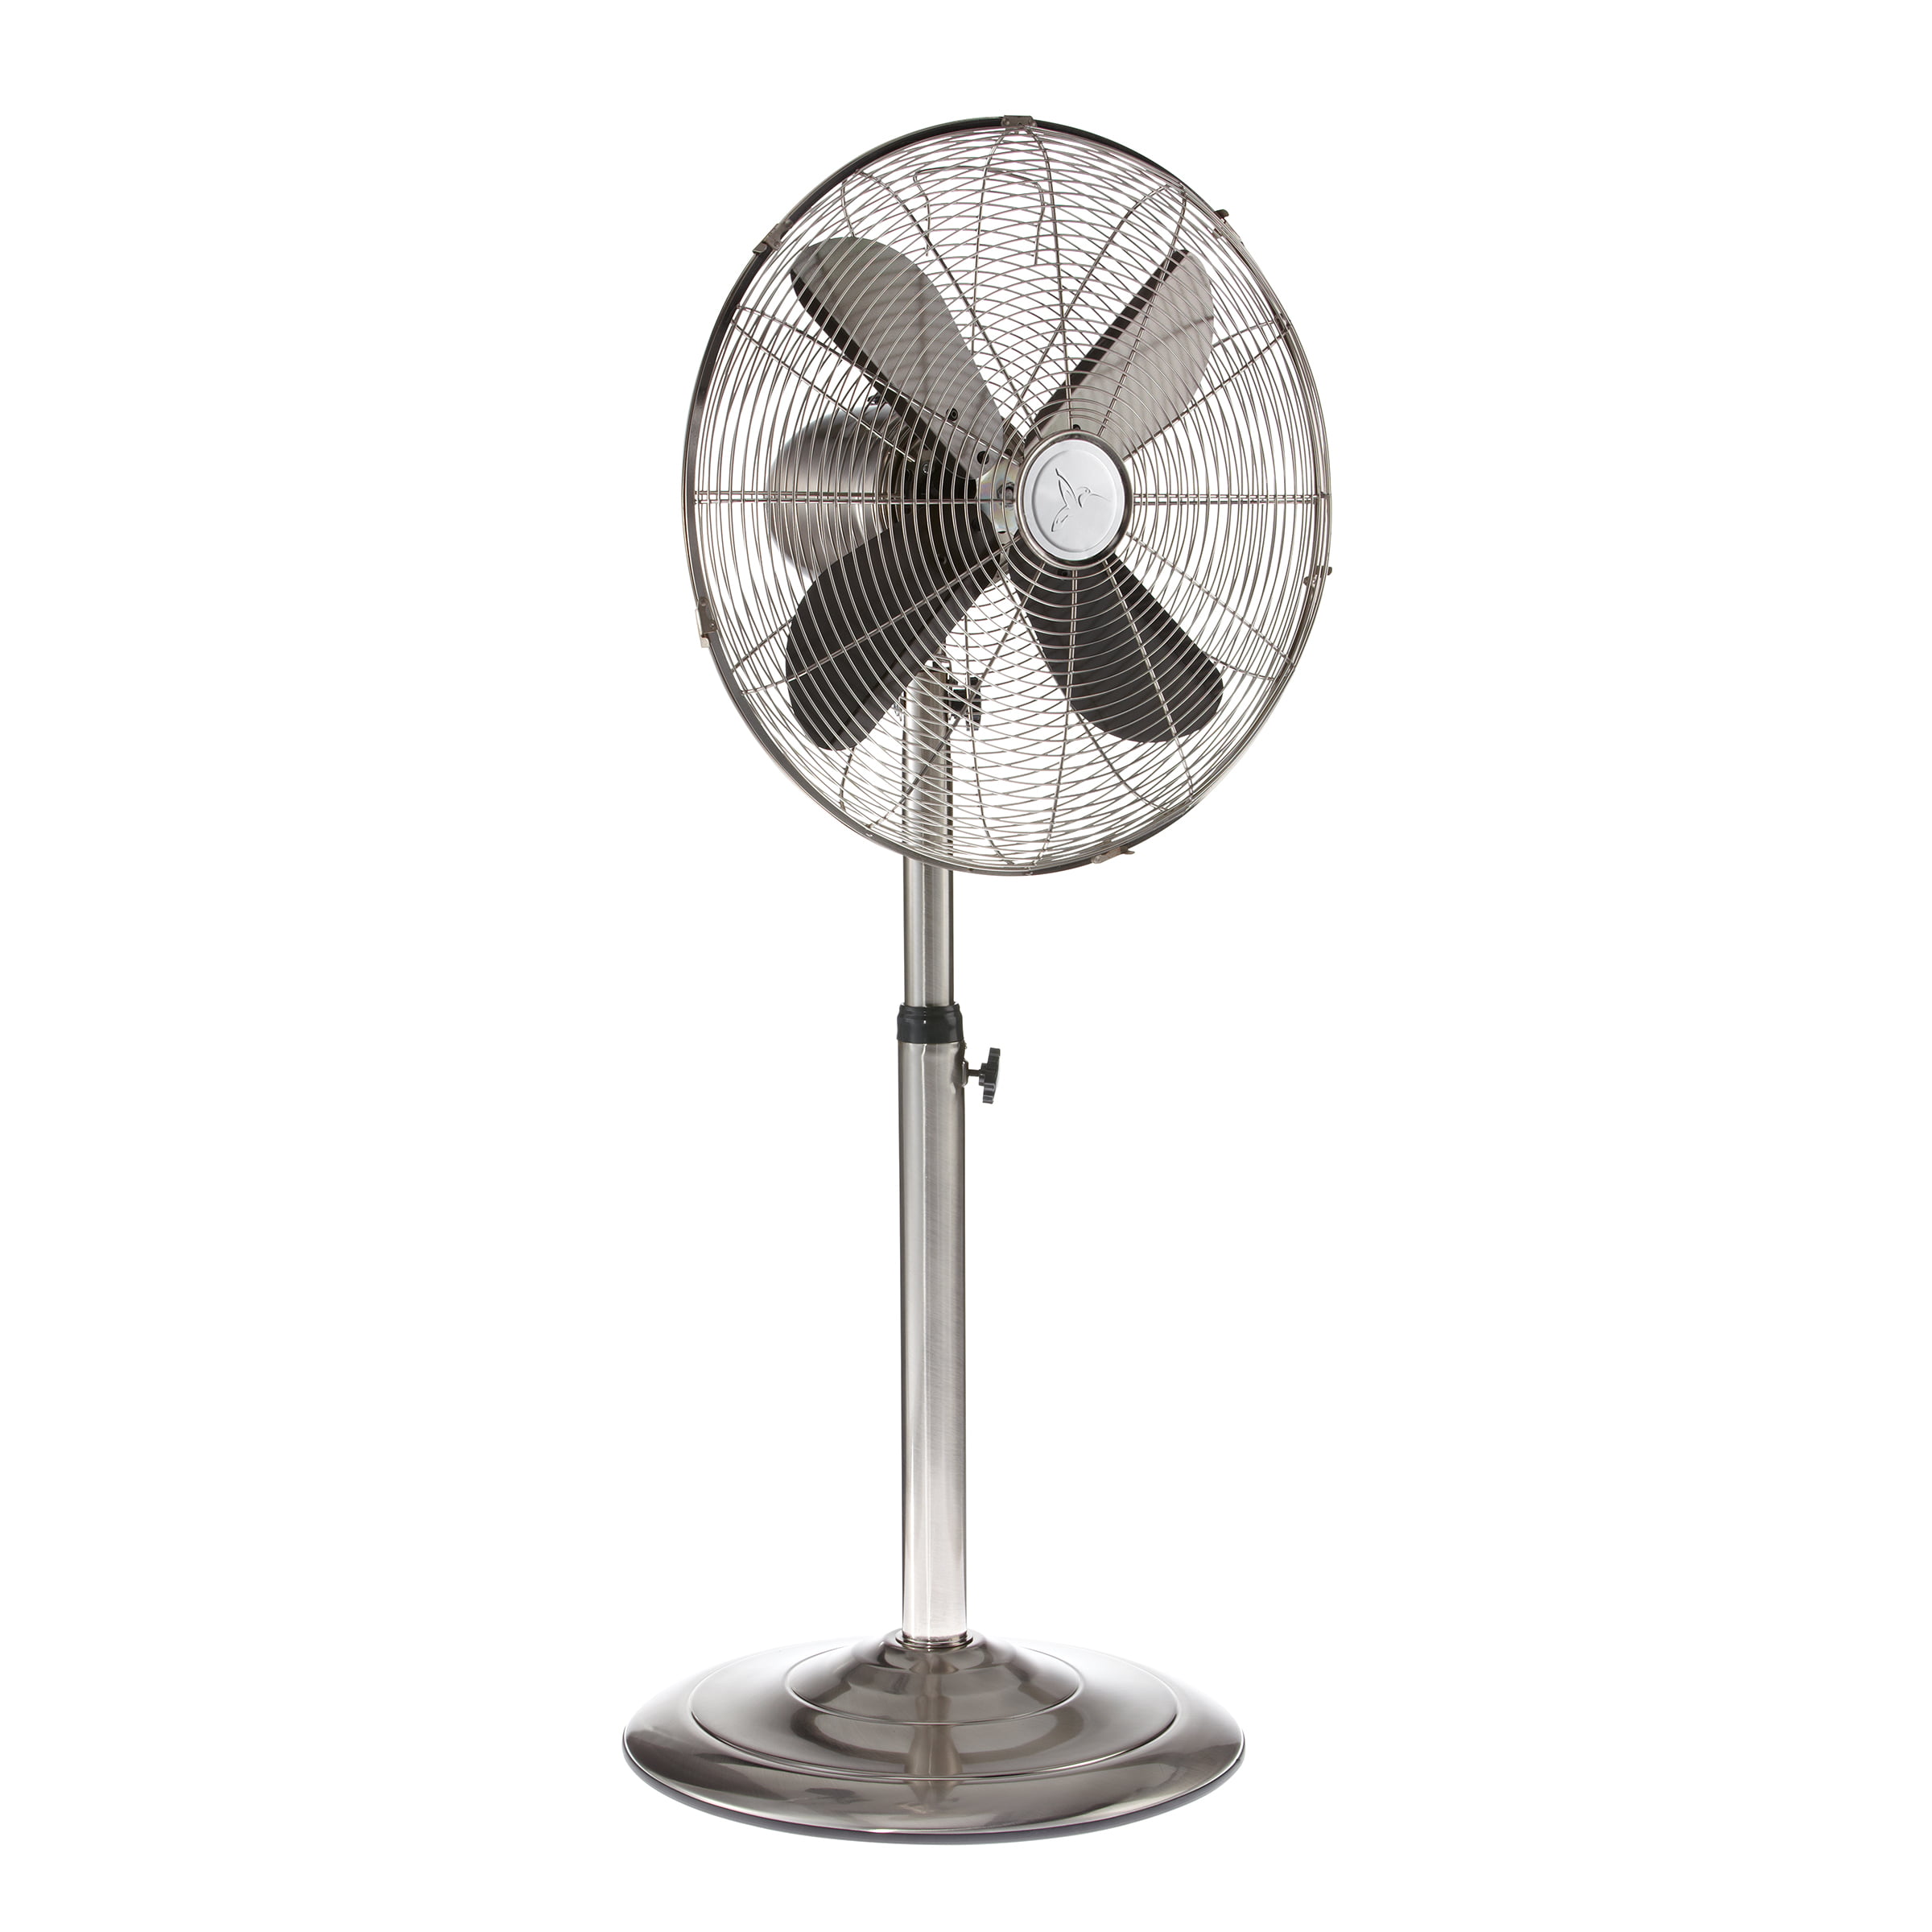 Oscillating//Rotating or Static with 3 Speed Settings Extendable Height 108-129cm Mega/_JumbleSale/® 16/” Pedestal Fan Electric Floor Standing Cooling Fan